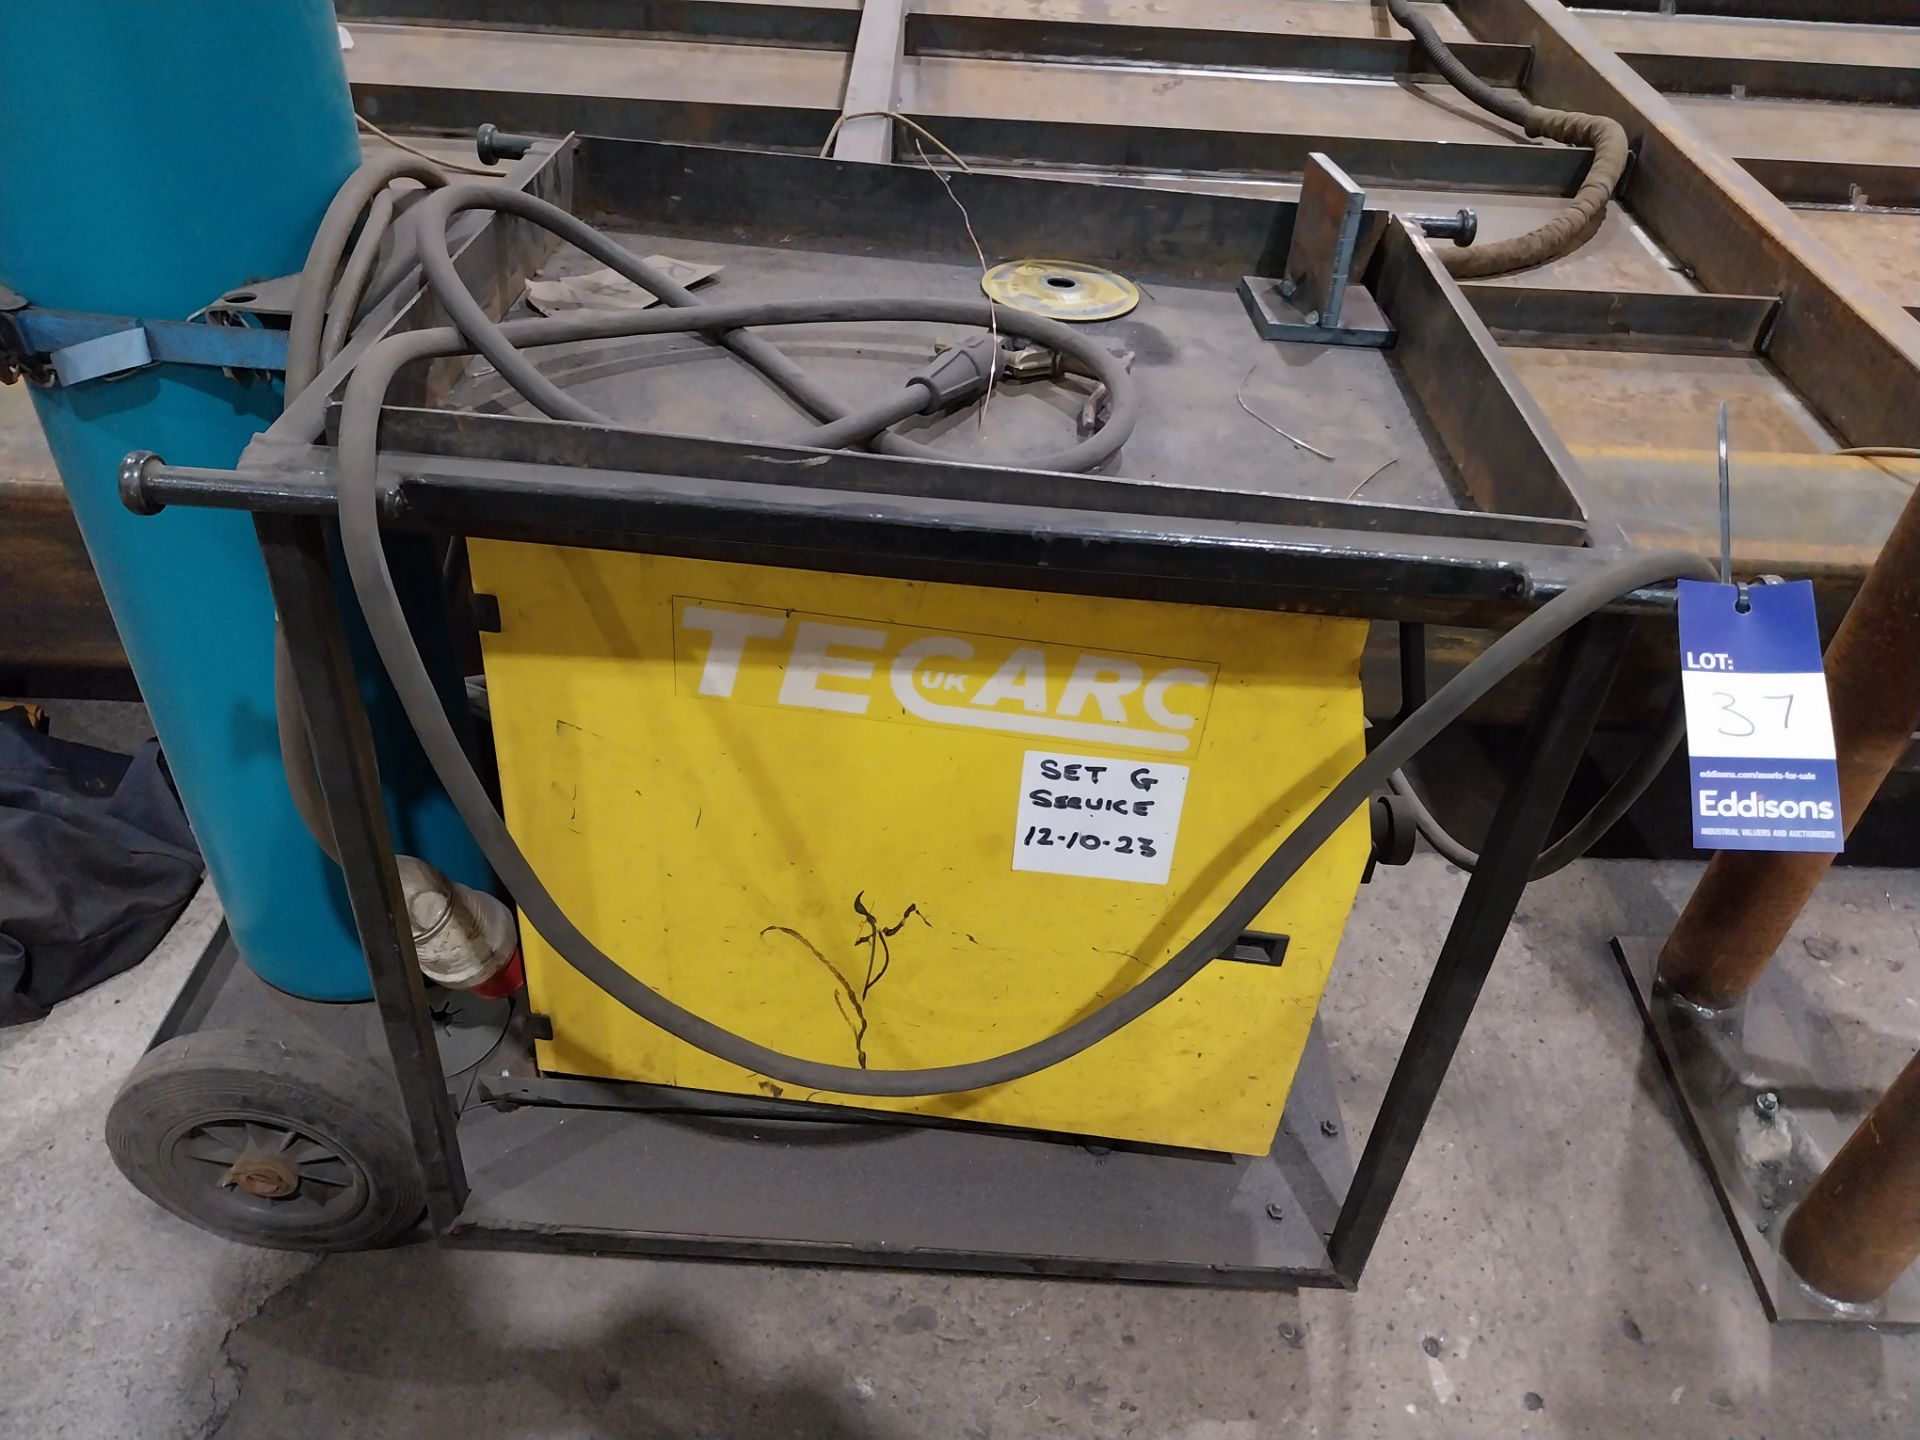 TecArc Synergic mig 423 mig welder on trolley (bottle not included) - Image 4 of 5